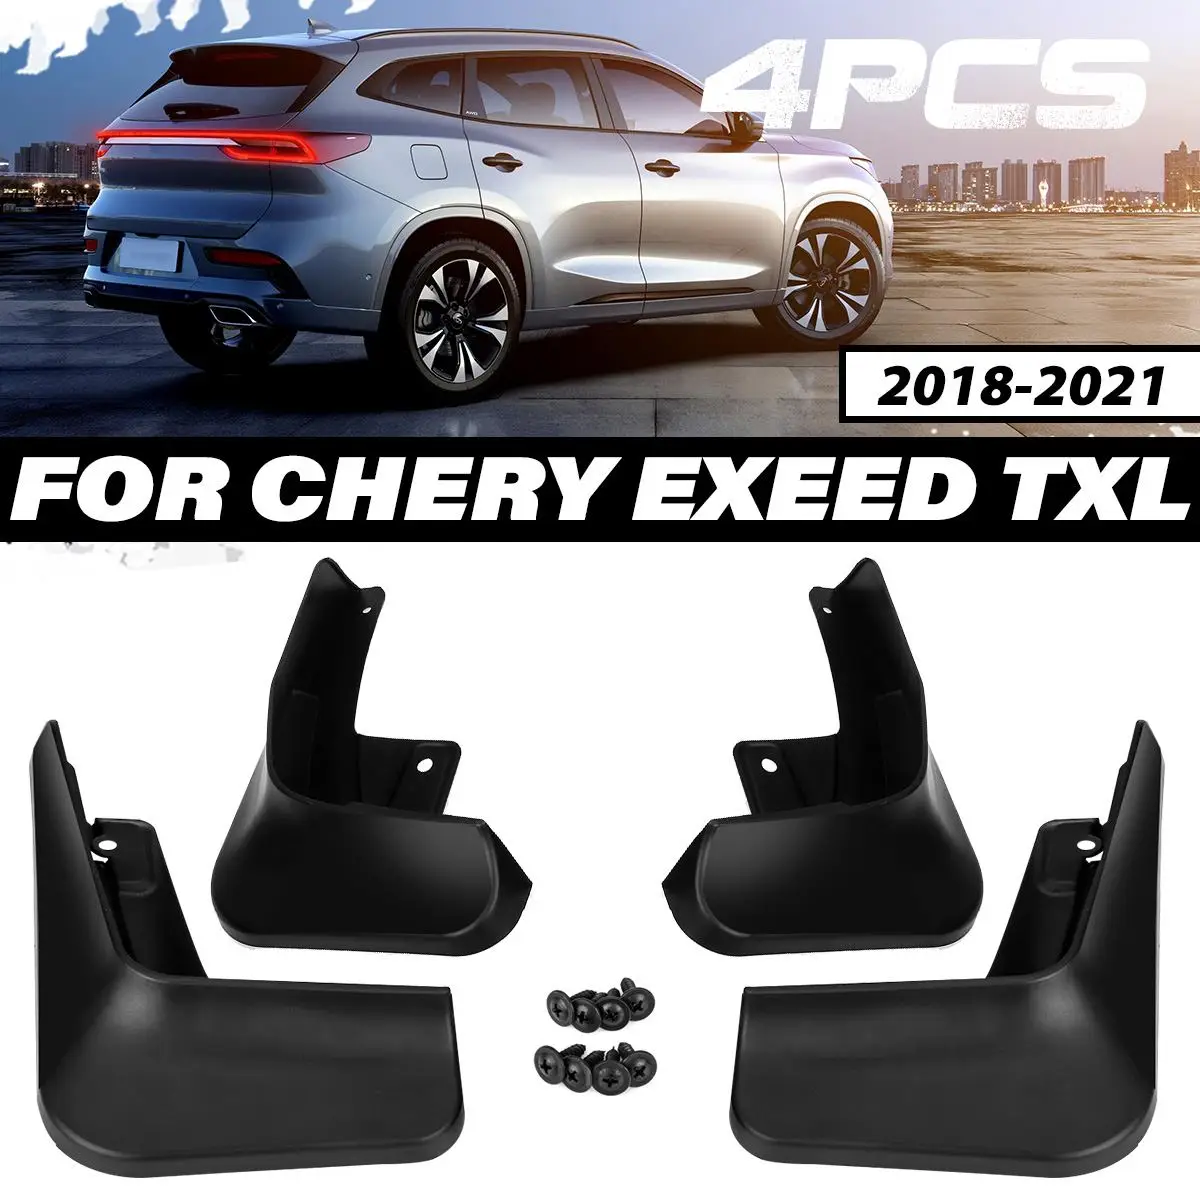 

4PCS Mudguards Mud Flap Flaps Splash Guards Fender Protector Cover for Chery exeed txl TX LX 2018 2019 2020 2021 Car Accessories